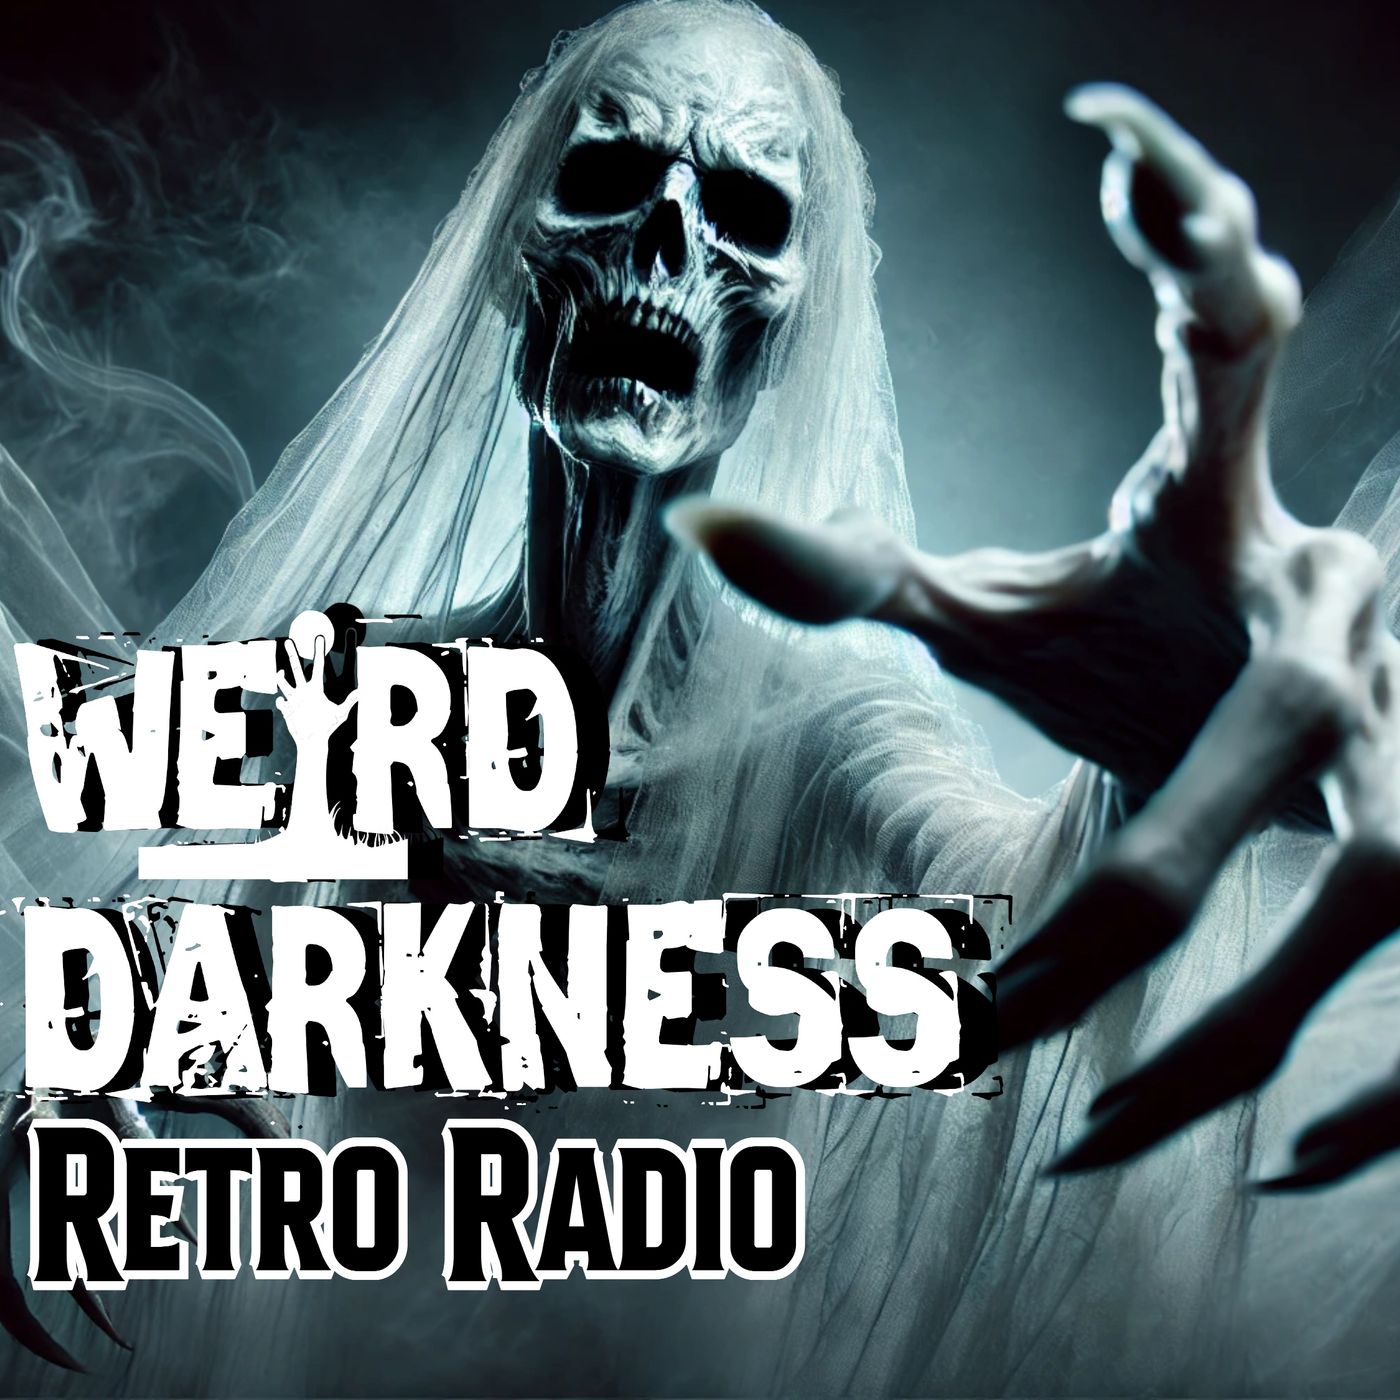 “PERNICIOUS POLTERGEISTS AND MURDEROUS MANIFESTATIONS” and more! #RetroRadio #WeirdDarkness